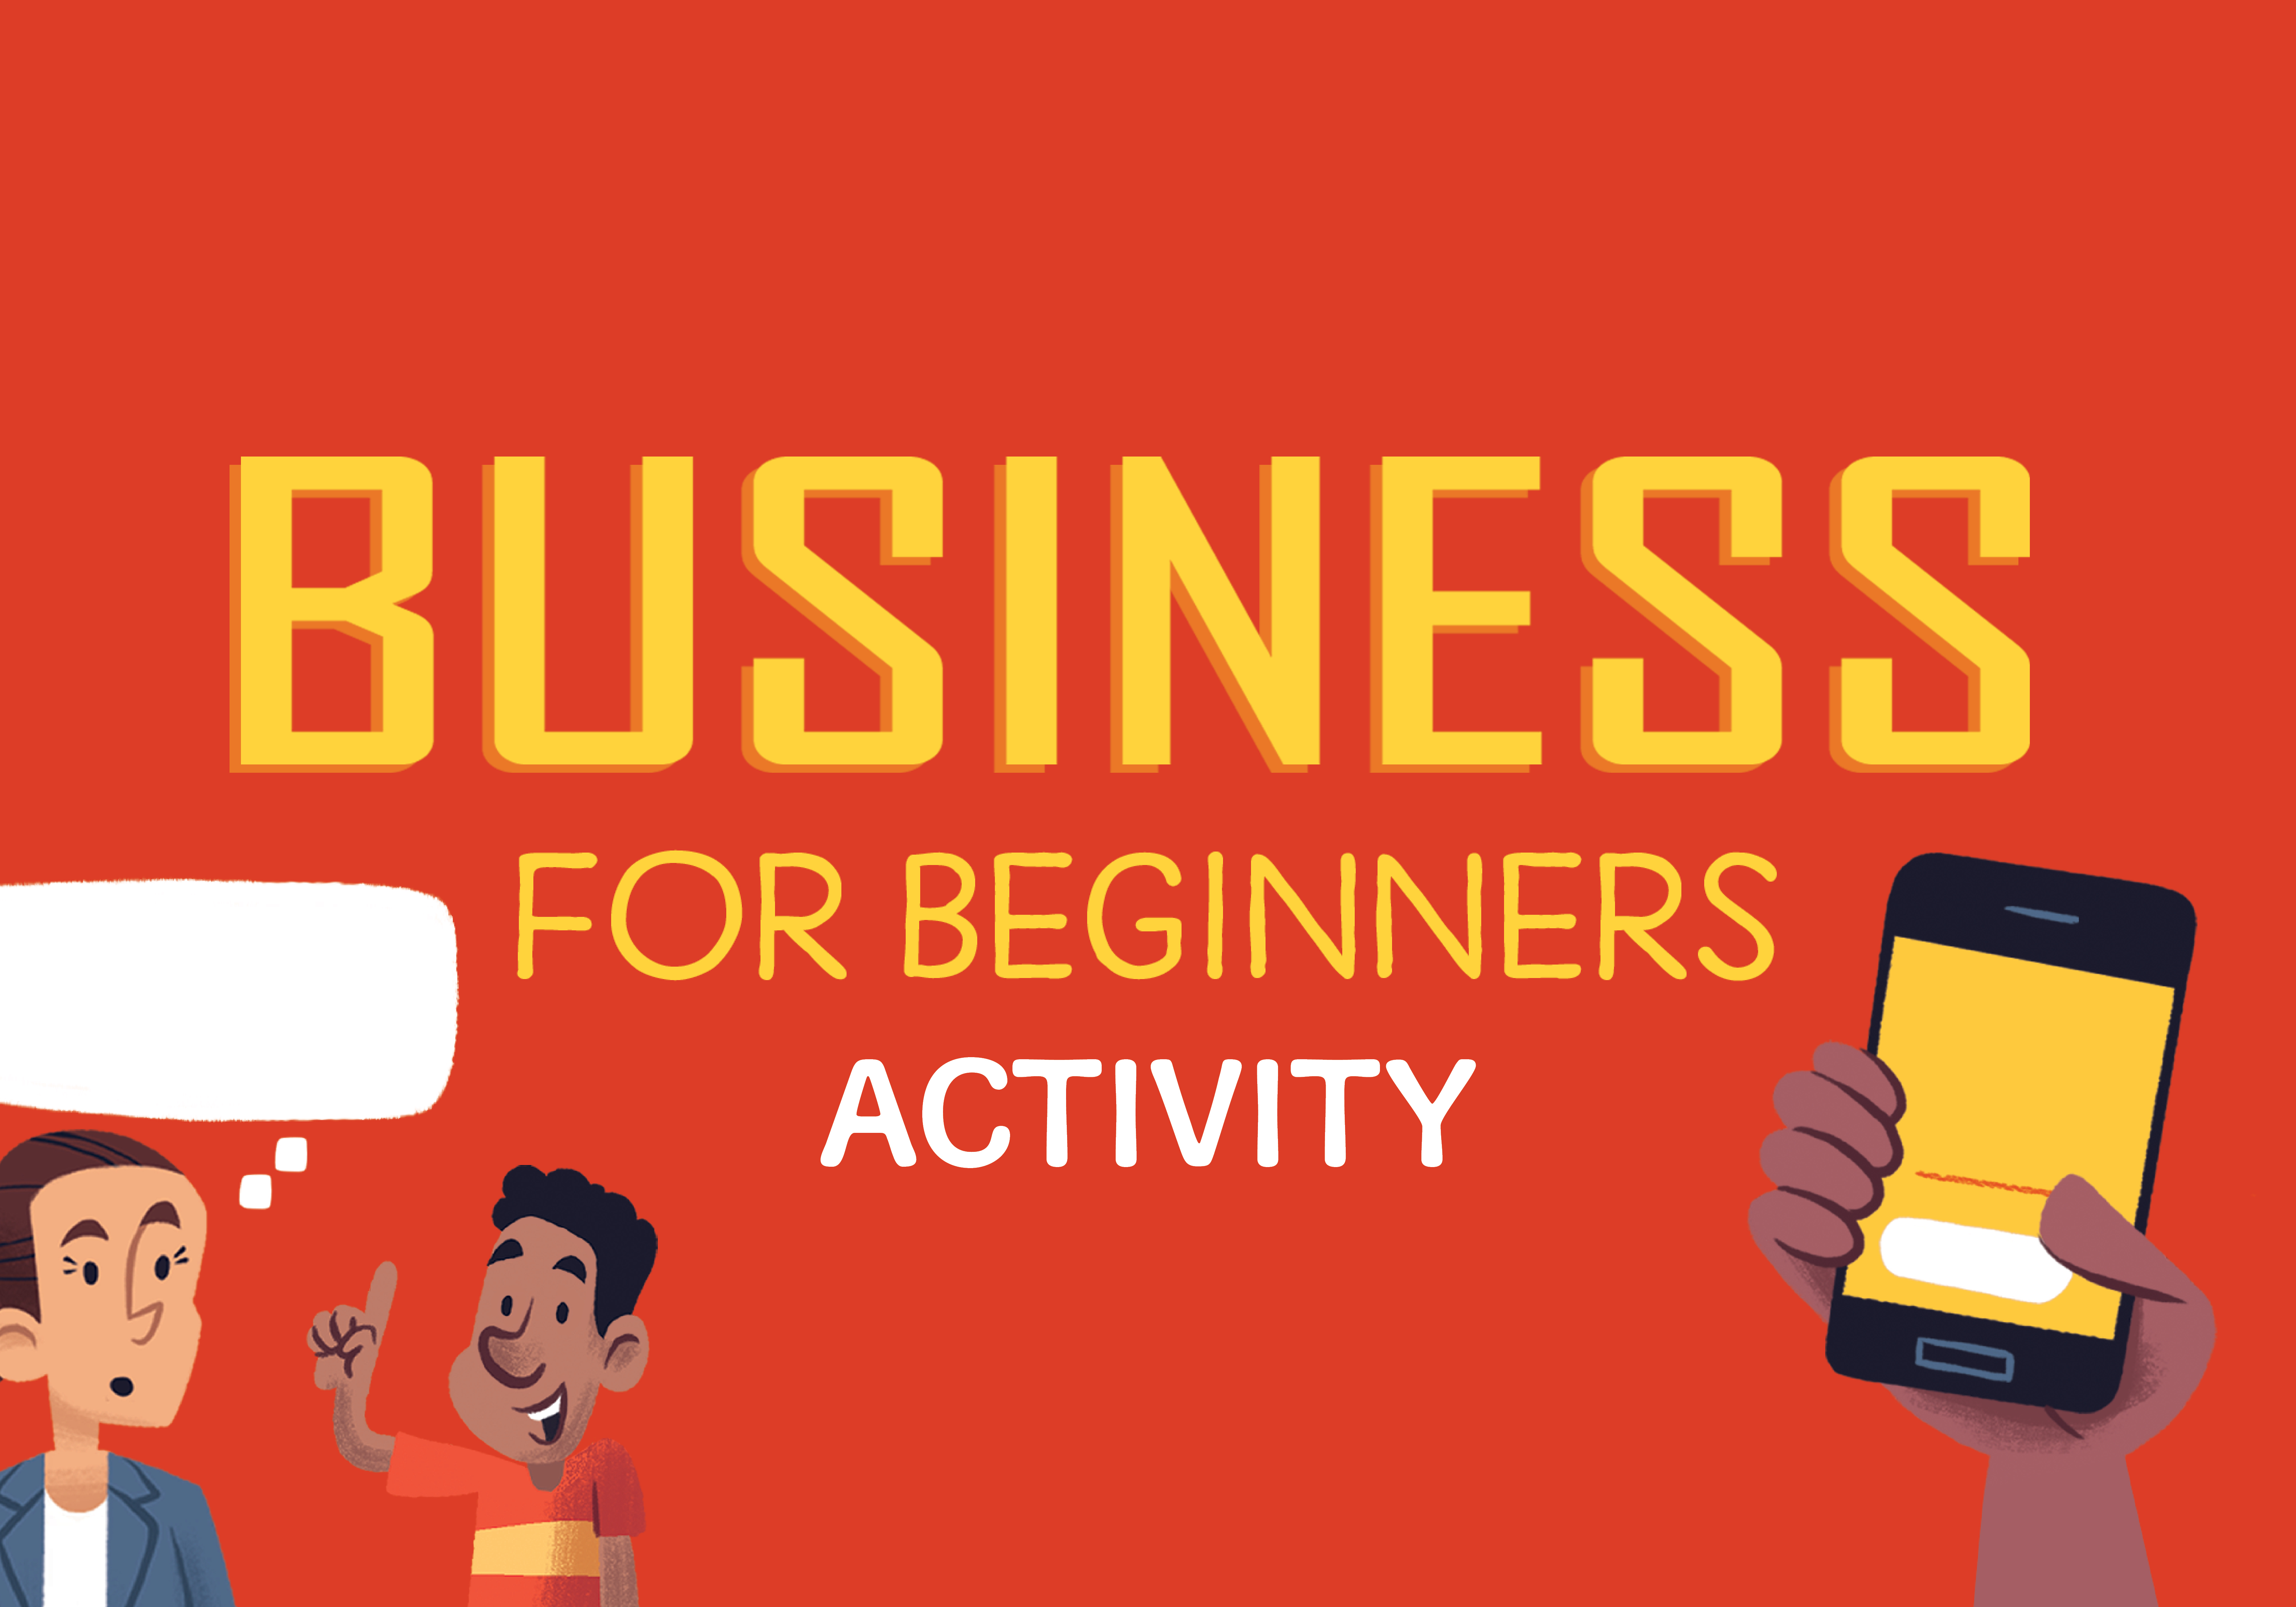 Business for Beginners | Usborne | Be Curious